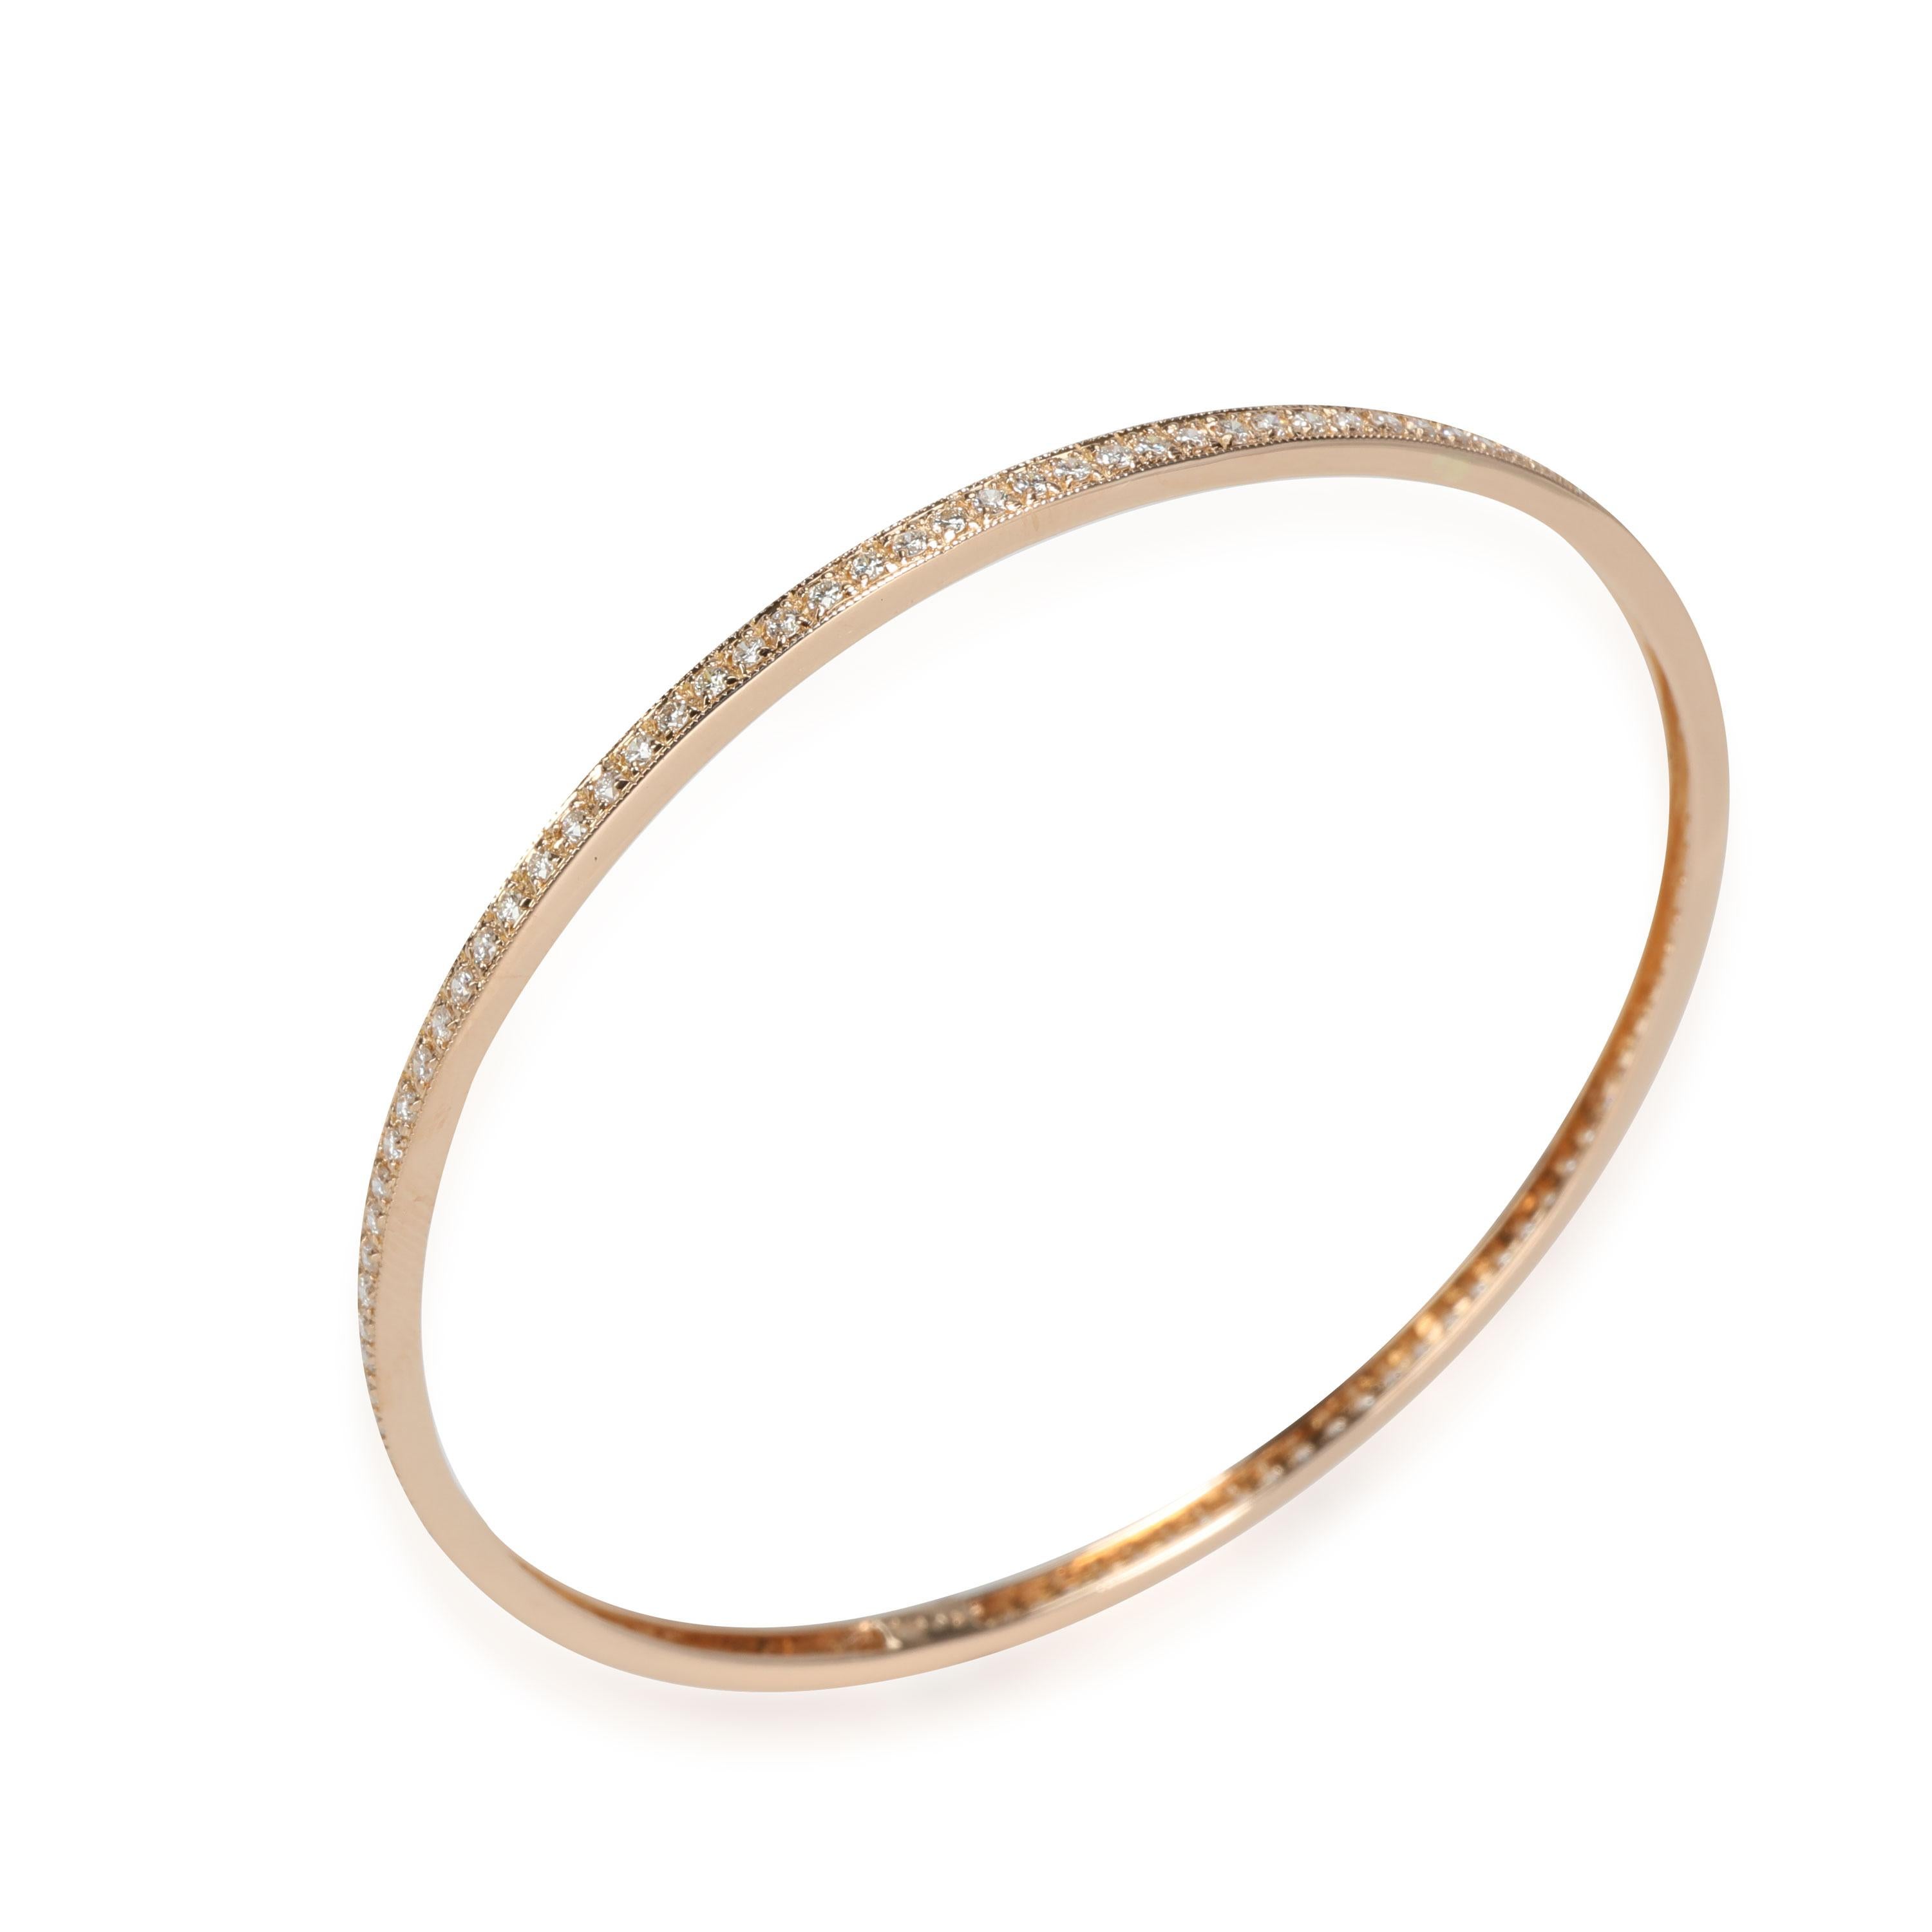 Diamond Bangle in 18k Rose Gold 1.75 CTW

PRIMARY DETAILS
SKU: 117286
Listing Title: Diamond Bangle in 18k Rose Gold 1.75 CTW
Condition Description: Retails for 2995 USD. In excellent condition and recently polished. Chain is 7.5 inches in